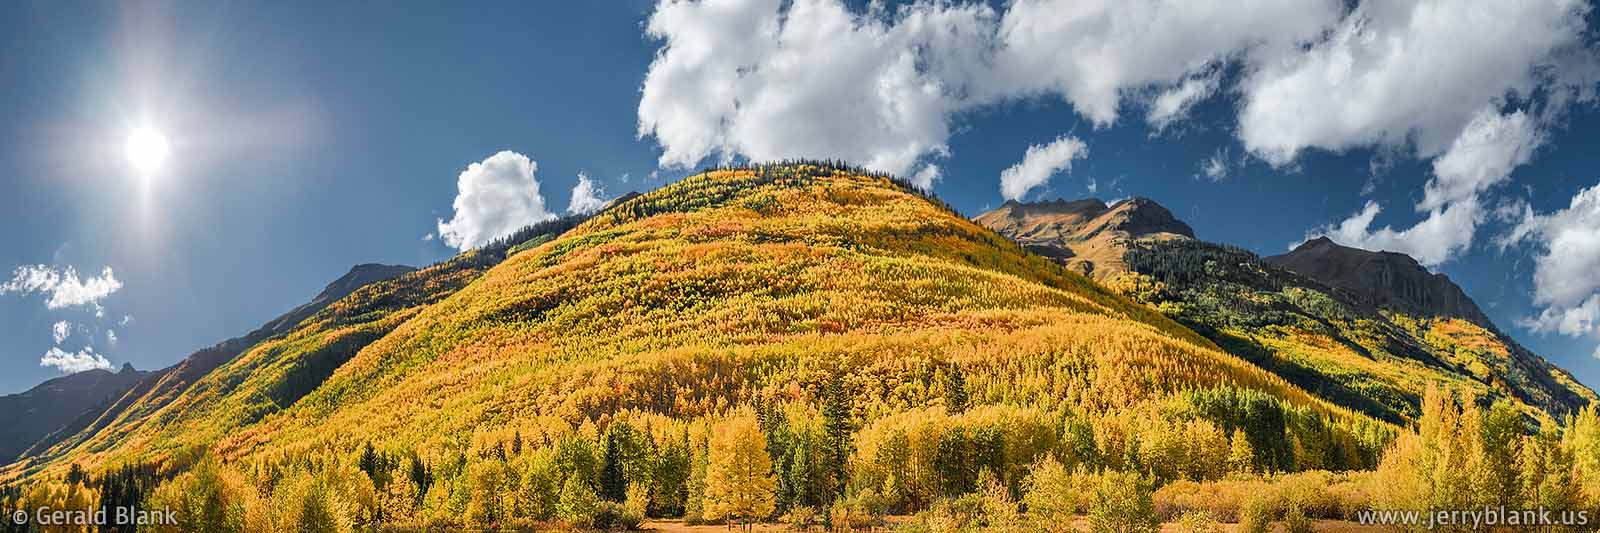 #43766 - An amazing panorama of autumn color on the foothills of Hayden Mountain in Colorado, as seen from US Hwy. 550 south of Ouray - photo by Jerry Blank